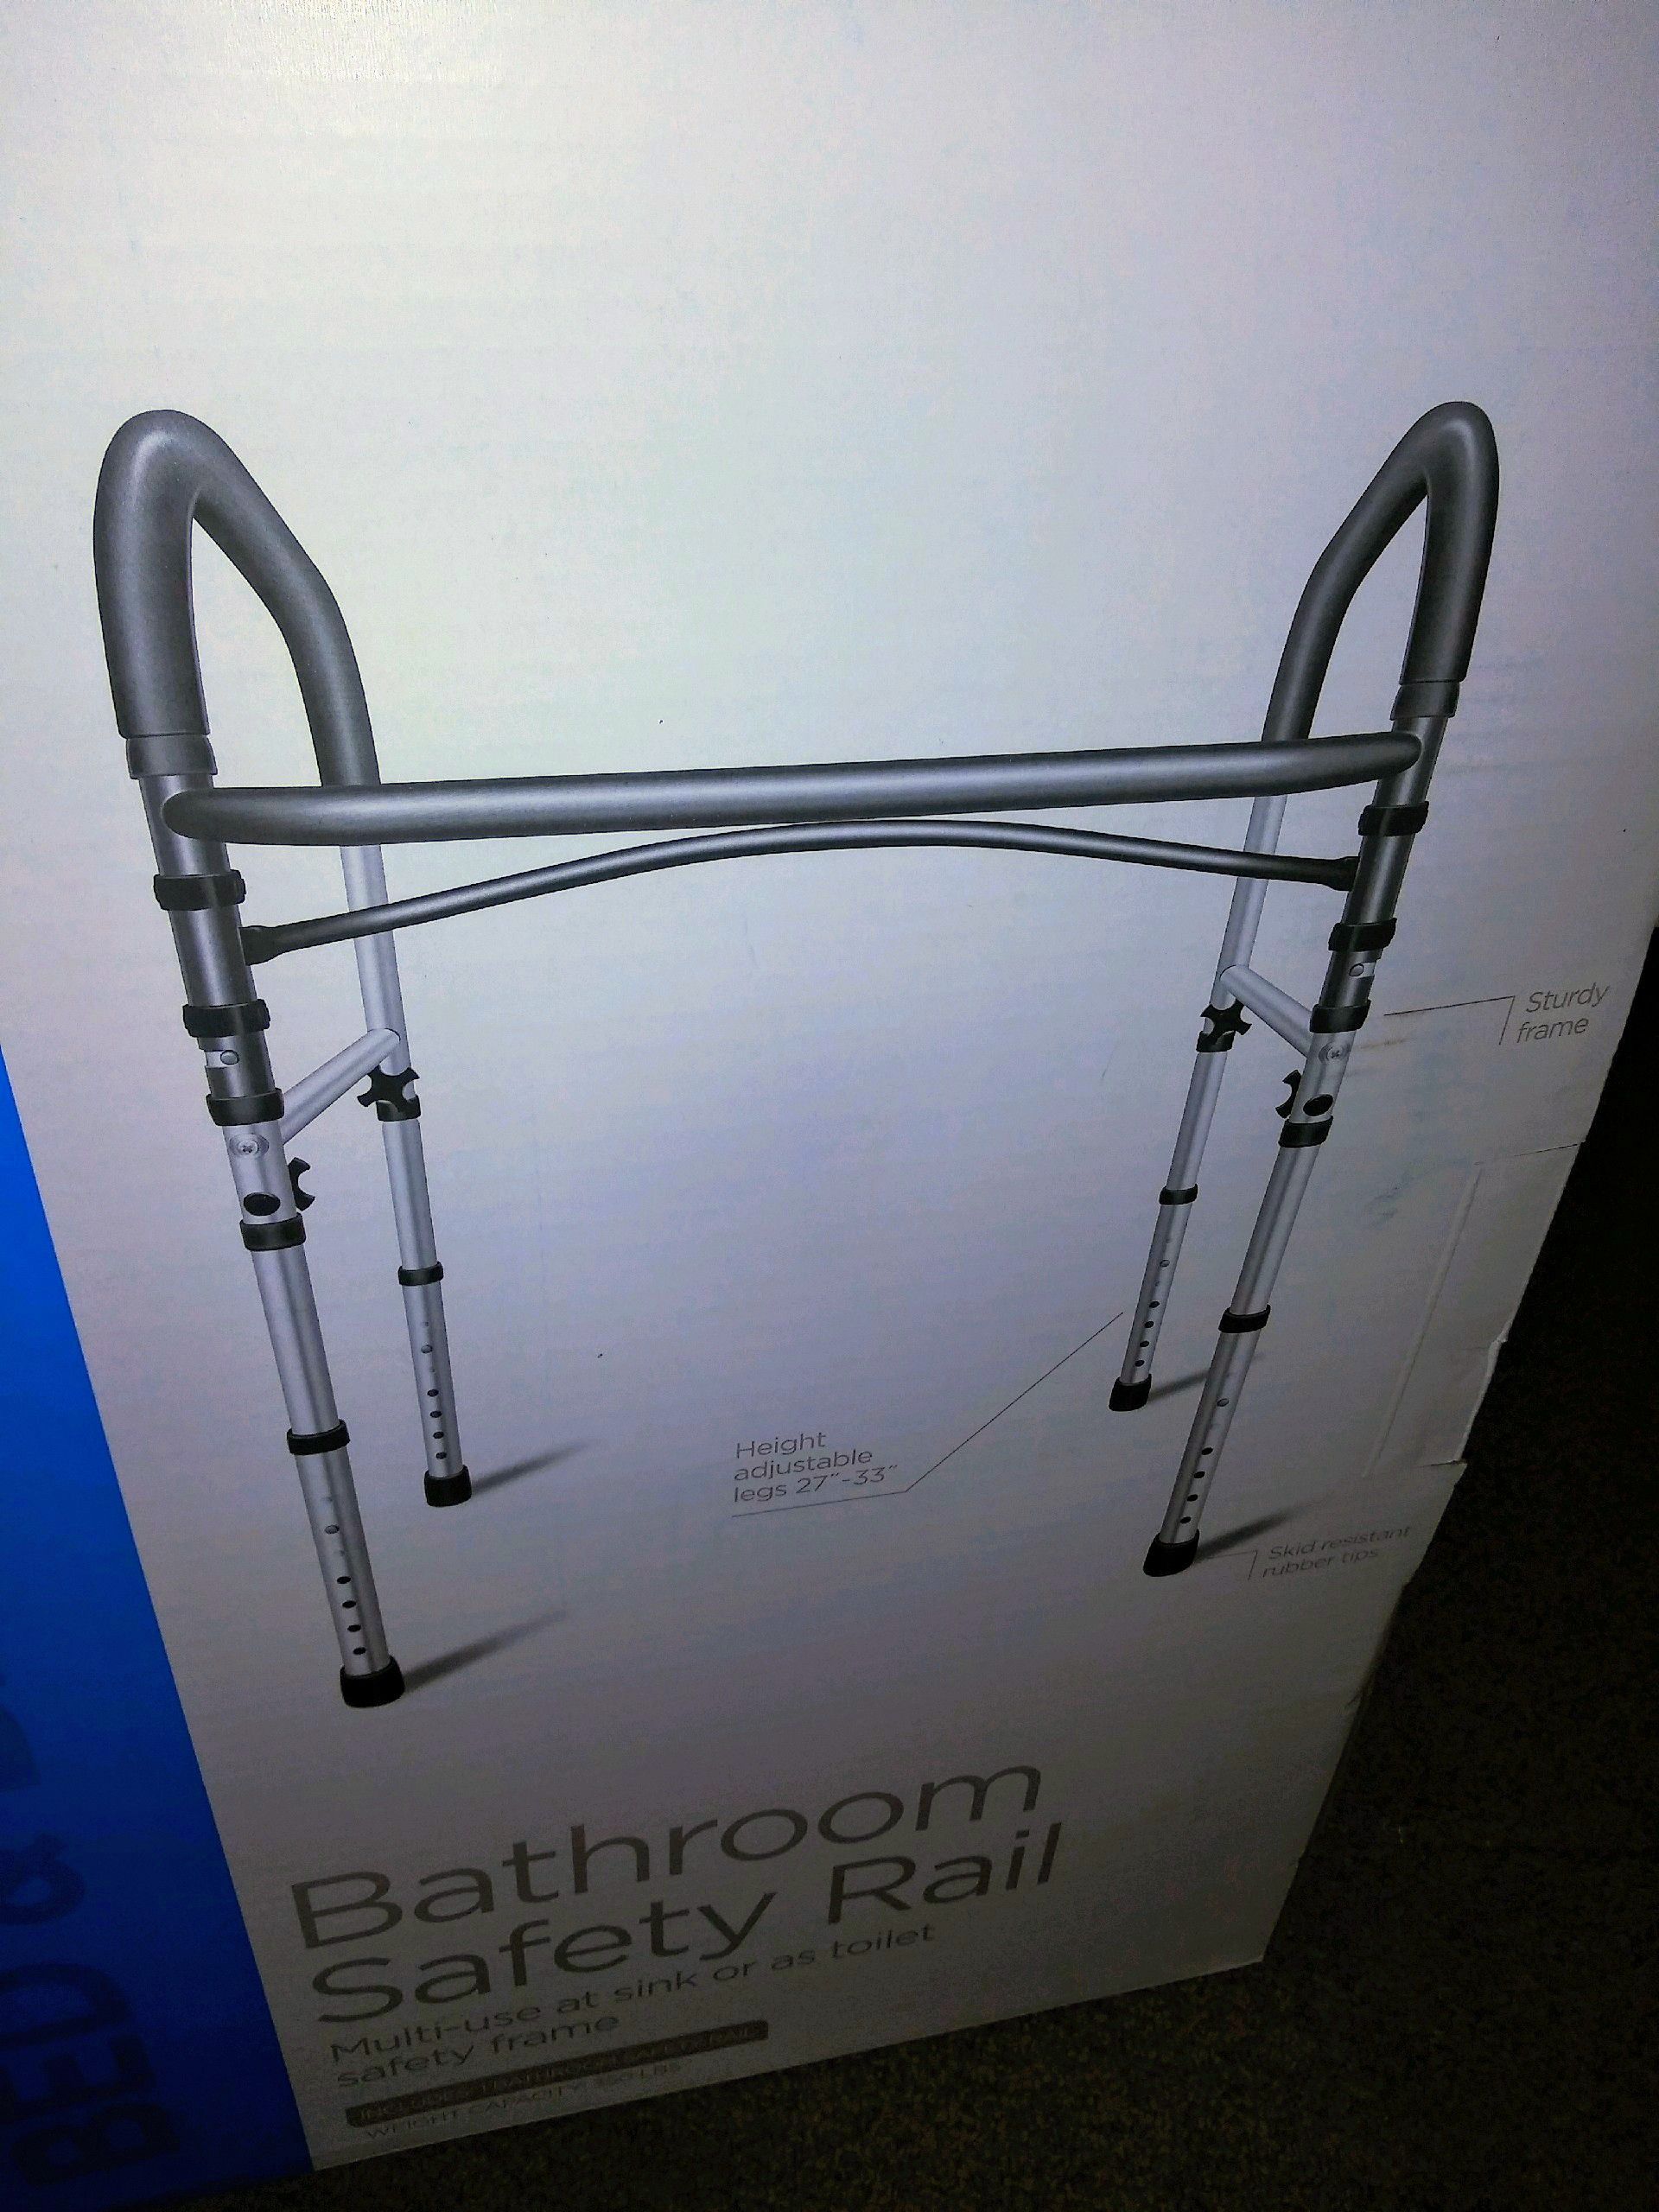 Bathroom safety rail new in box unopened